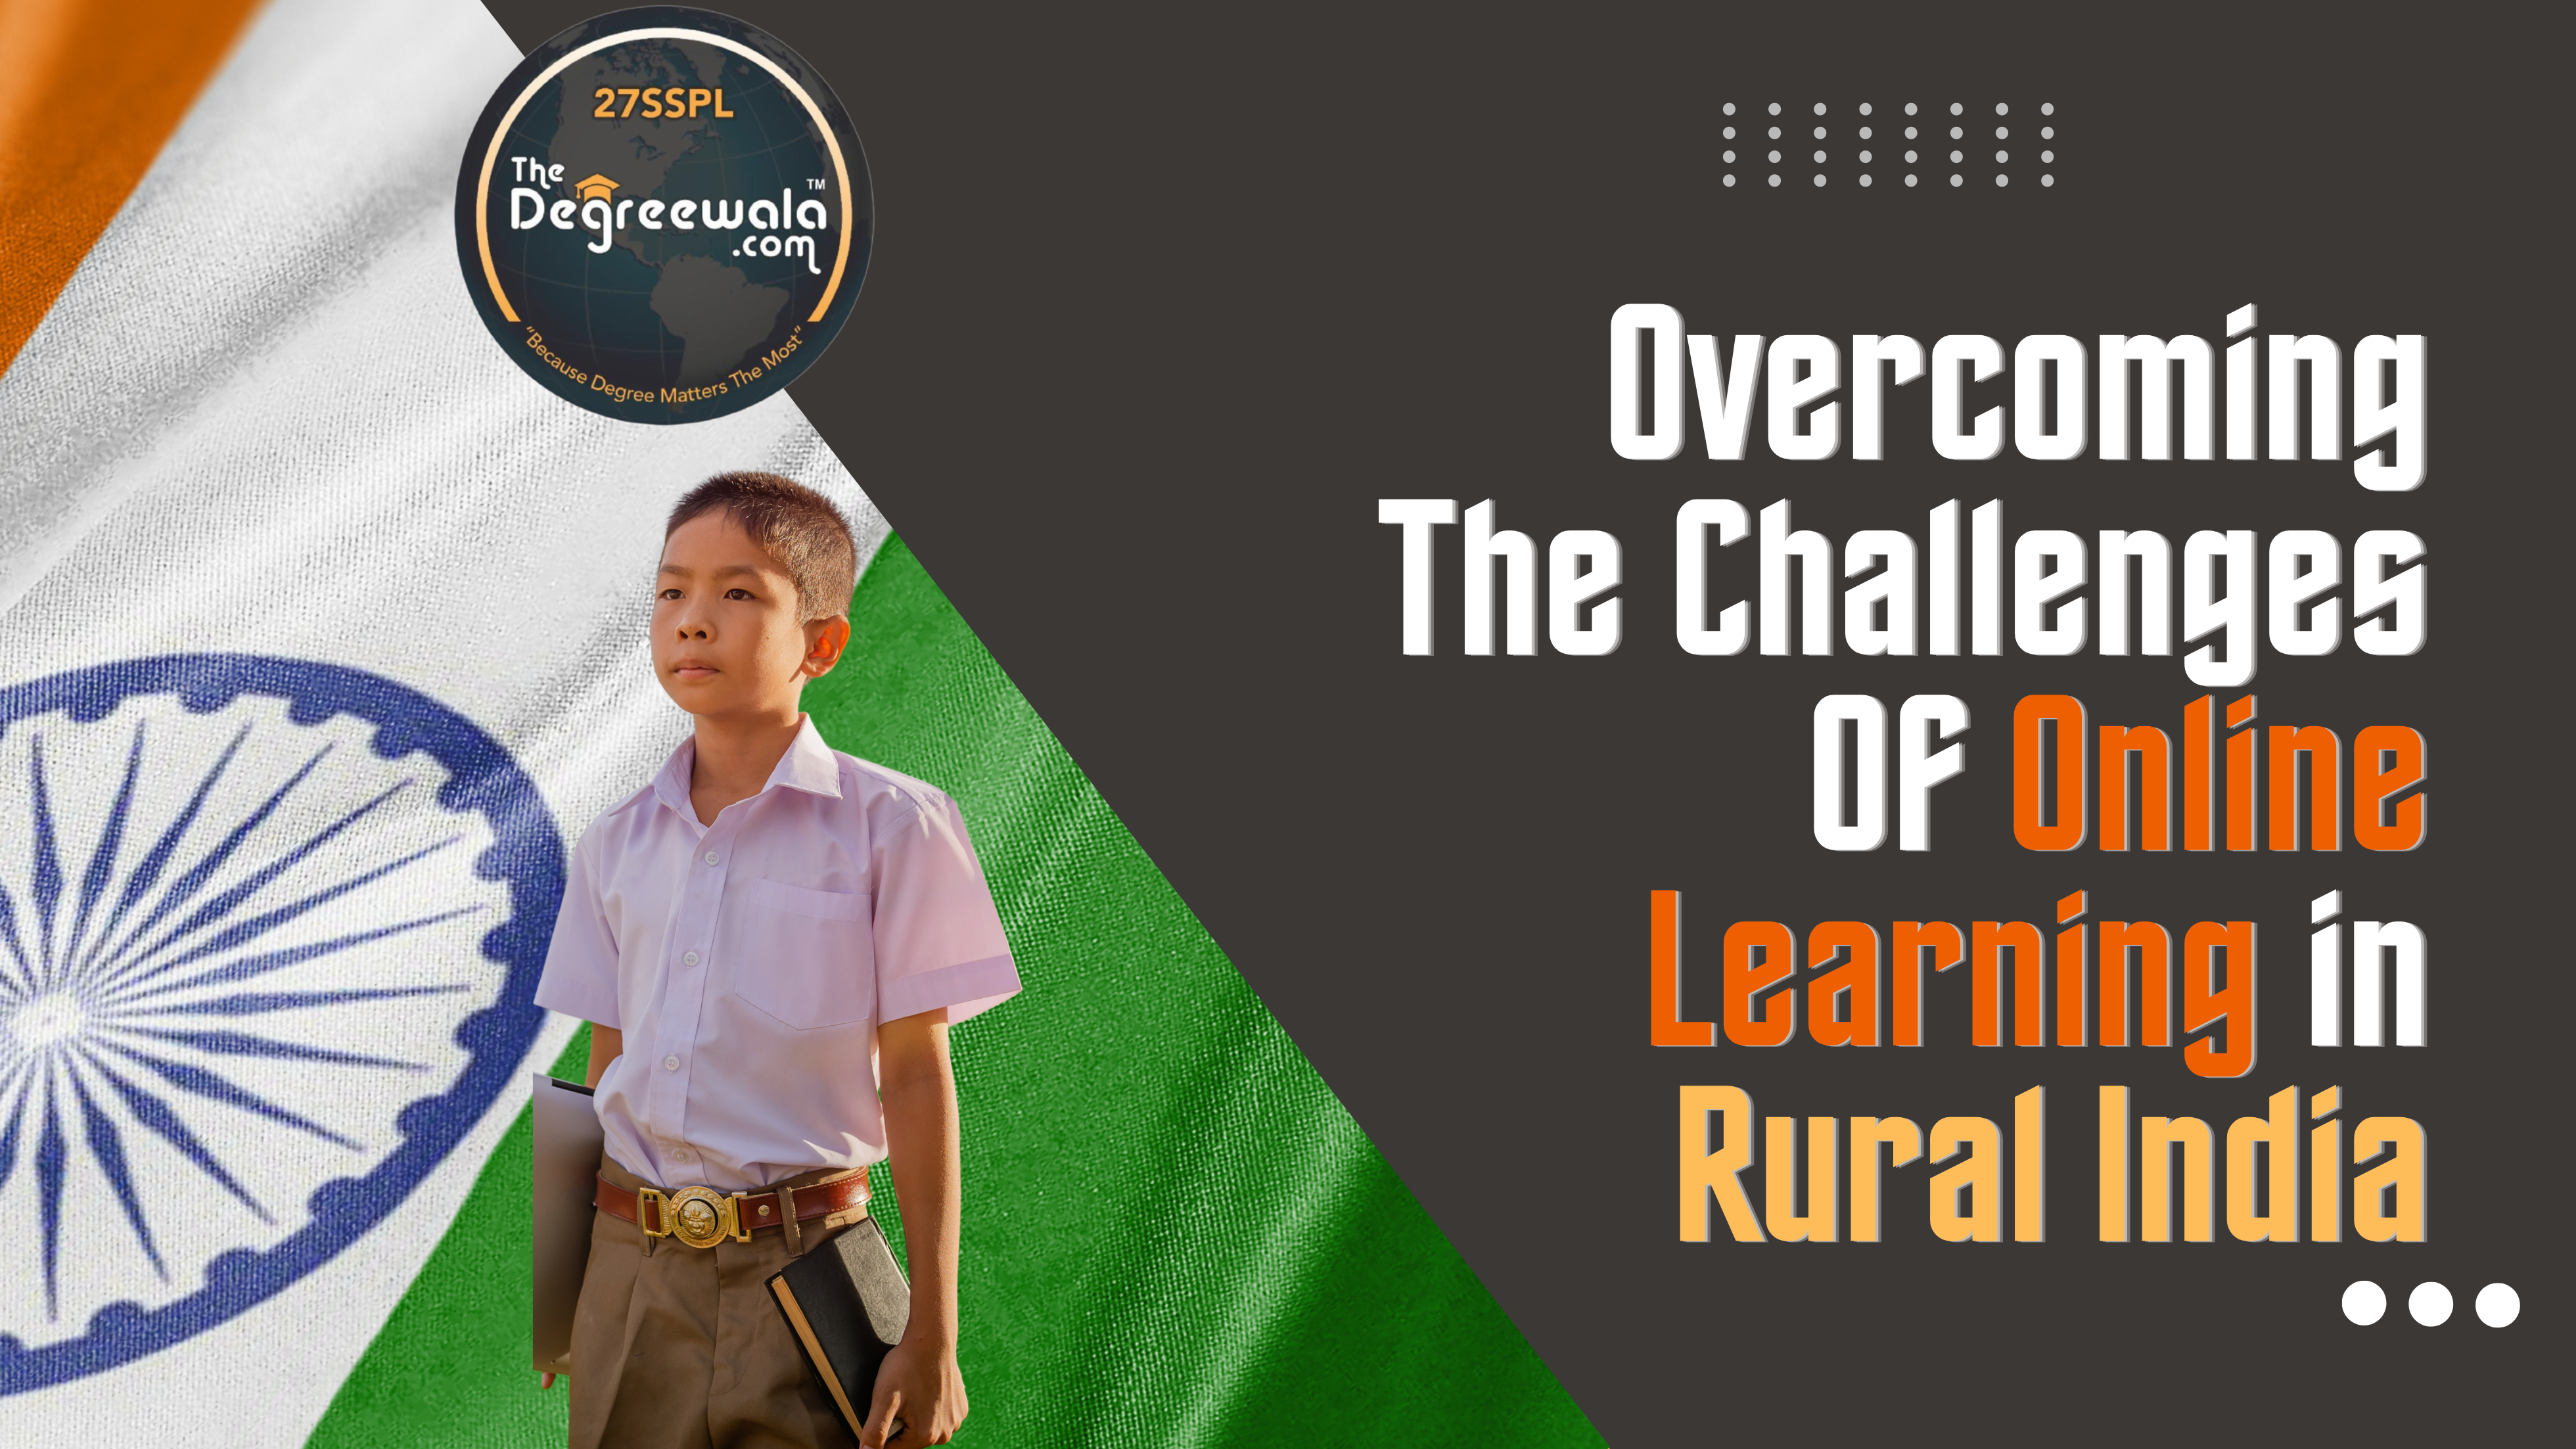 Challenges of Online Learning in Rural India